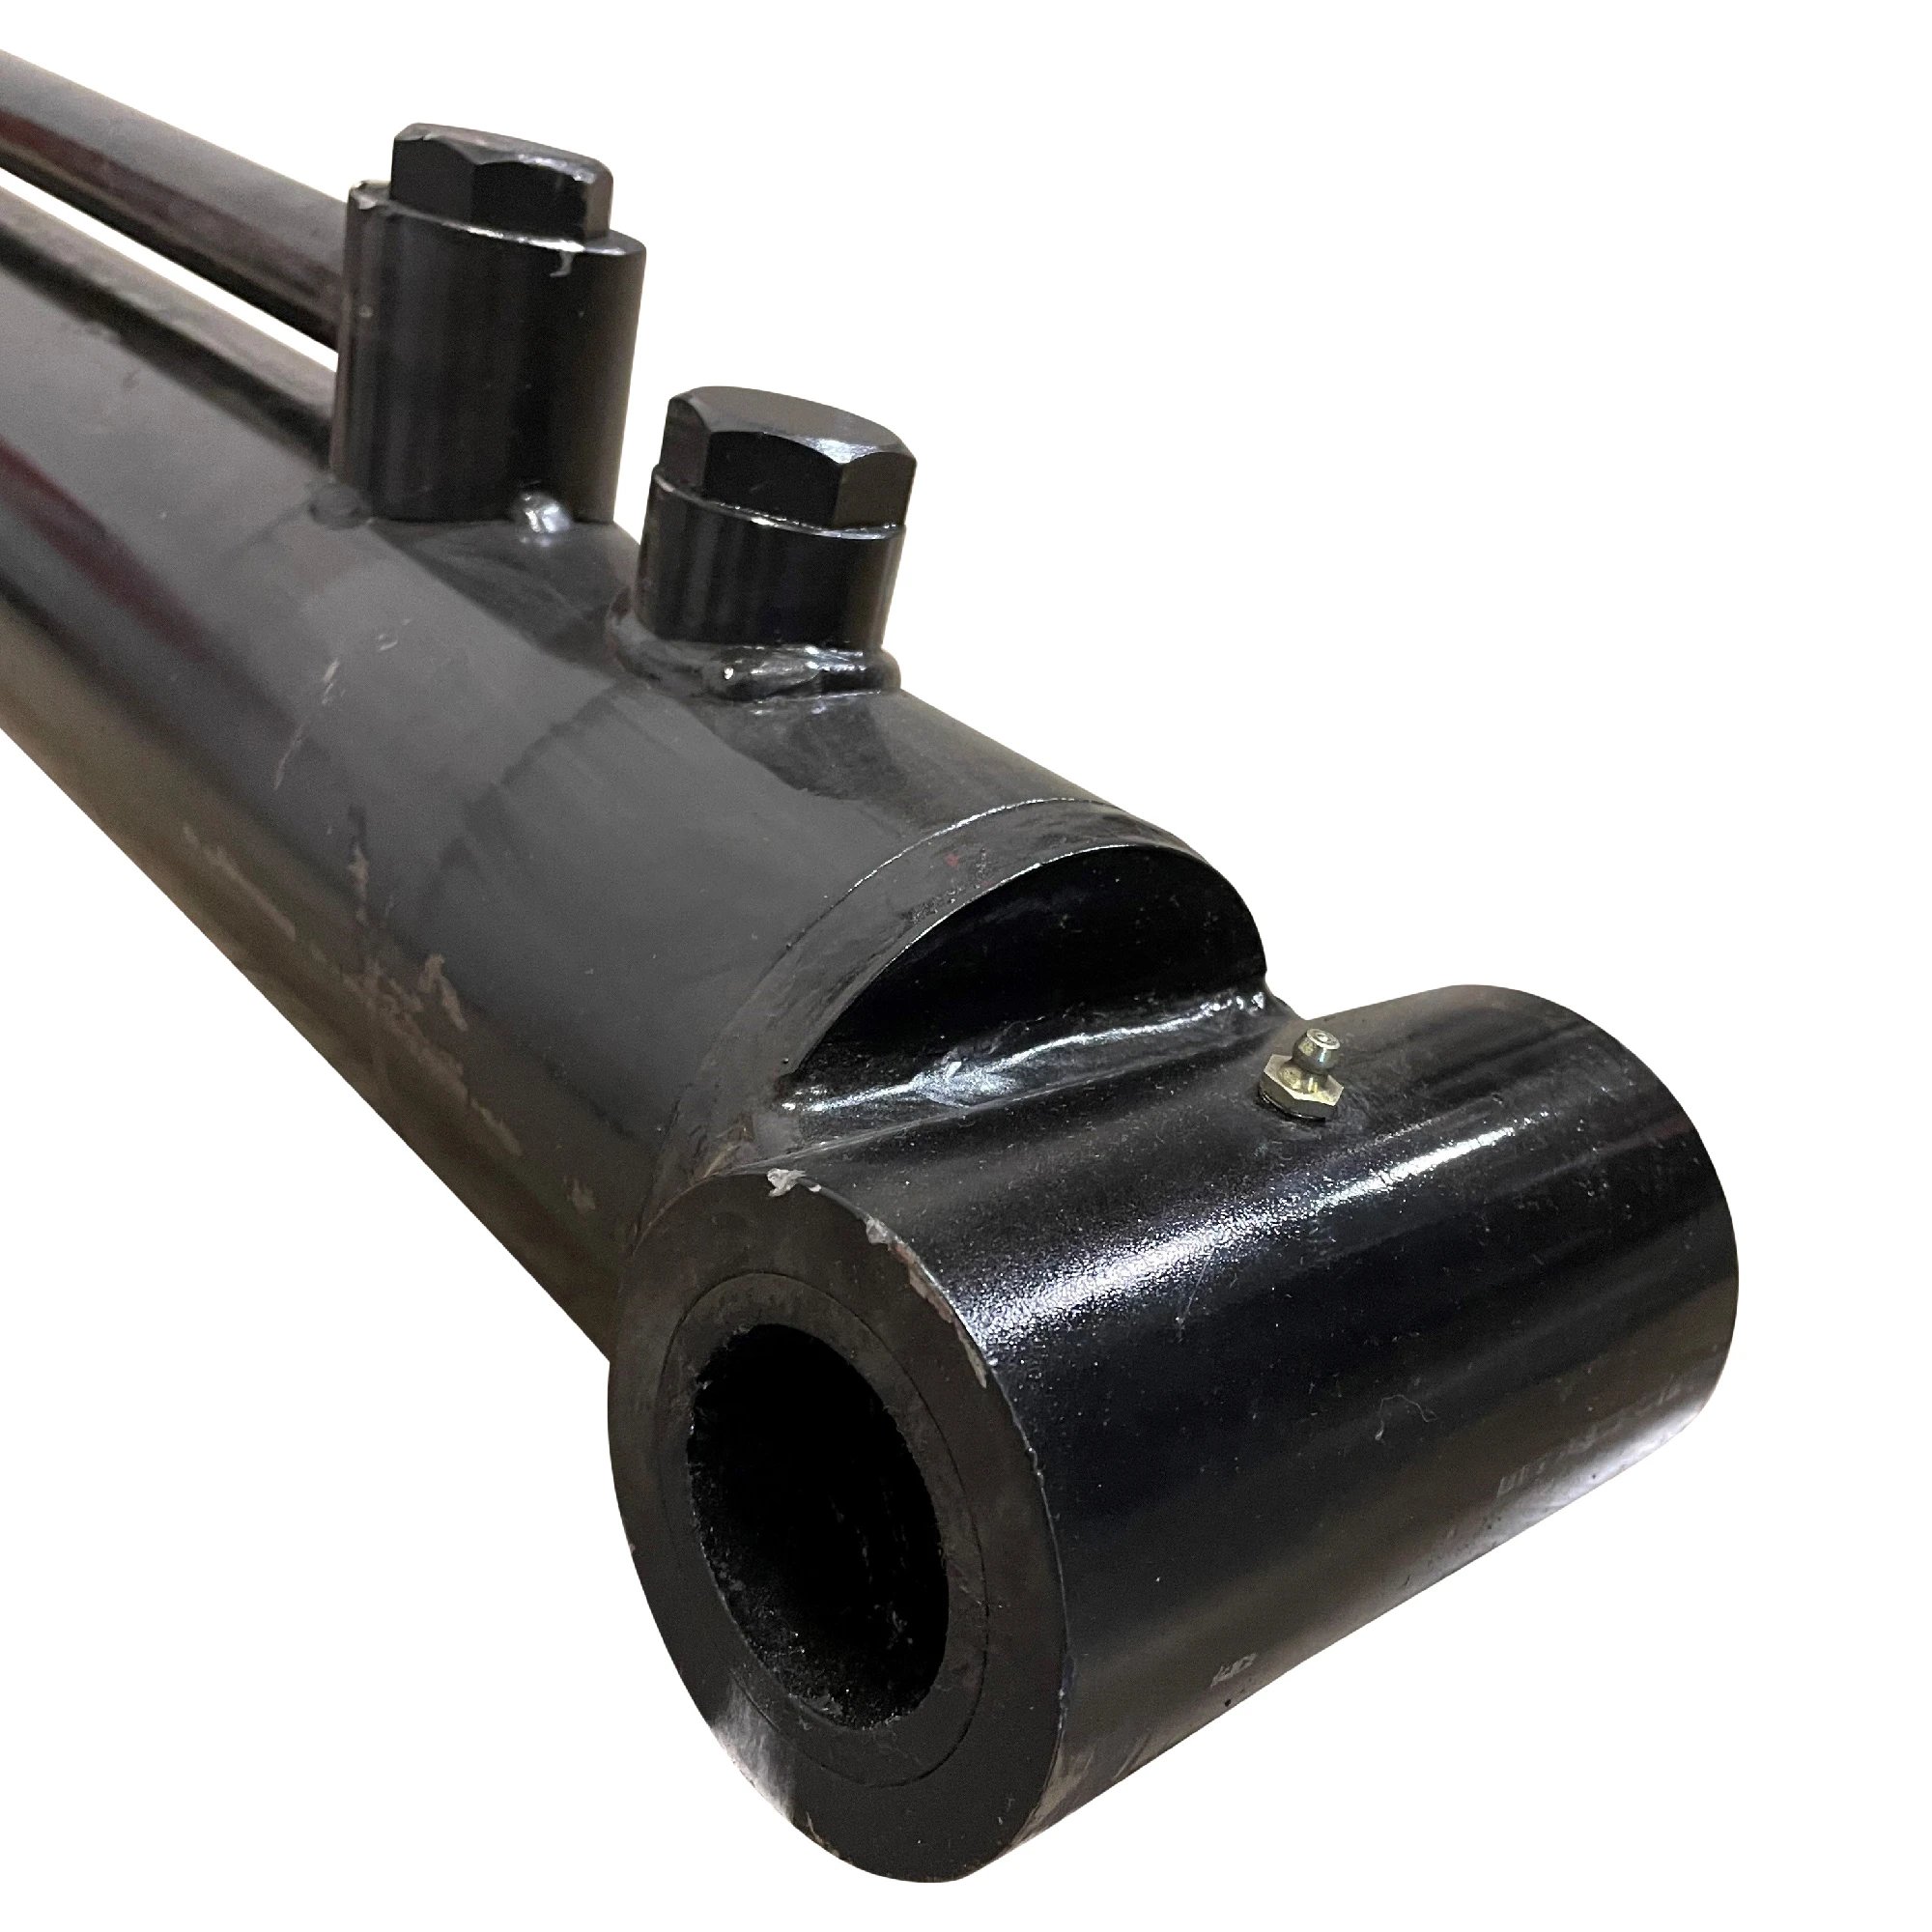 Wastebuilt® Replacement for McNeilus 4.50 x 3.00 x 52.75 Cylinder